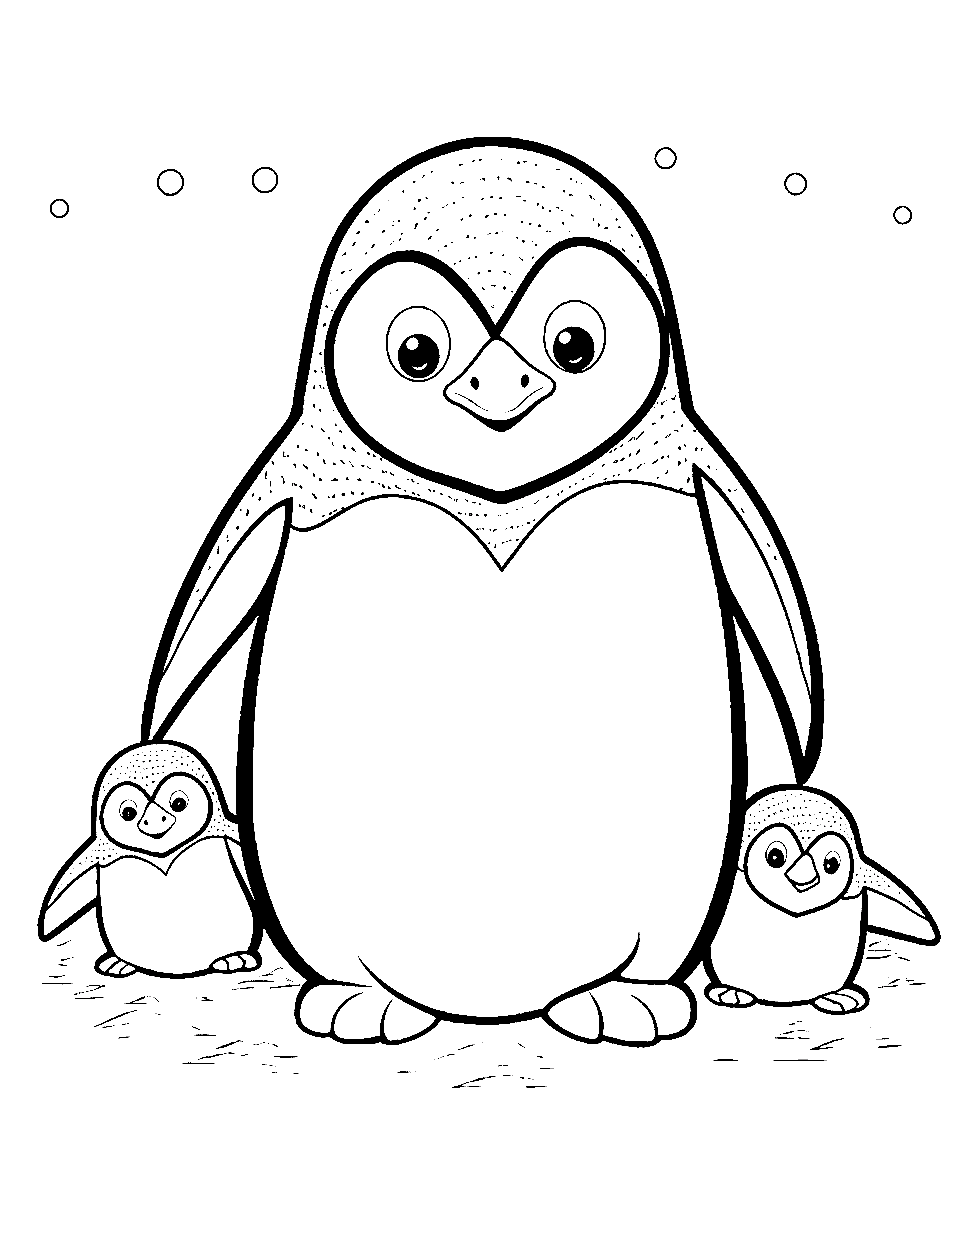 Loving Penguin Family Coloring Page - Two penguins and their parent close together in a loving scene.